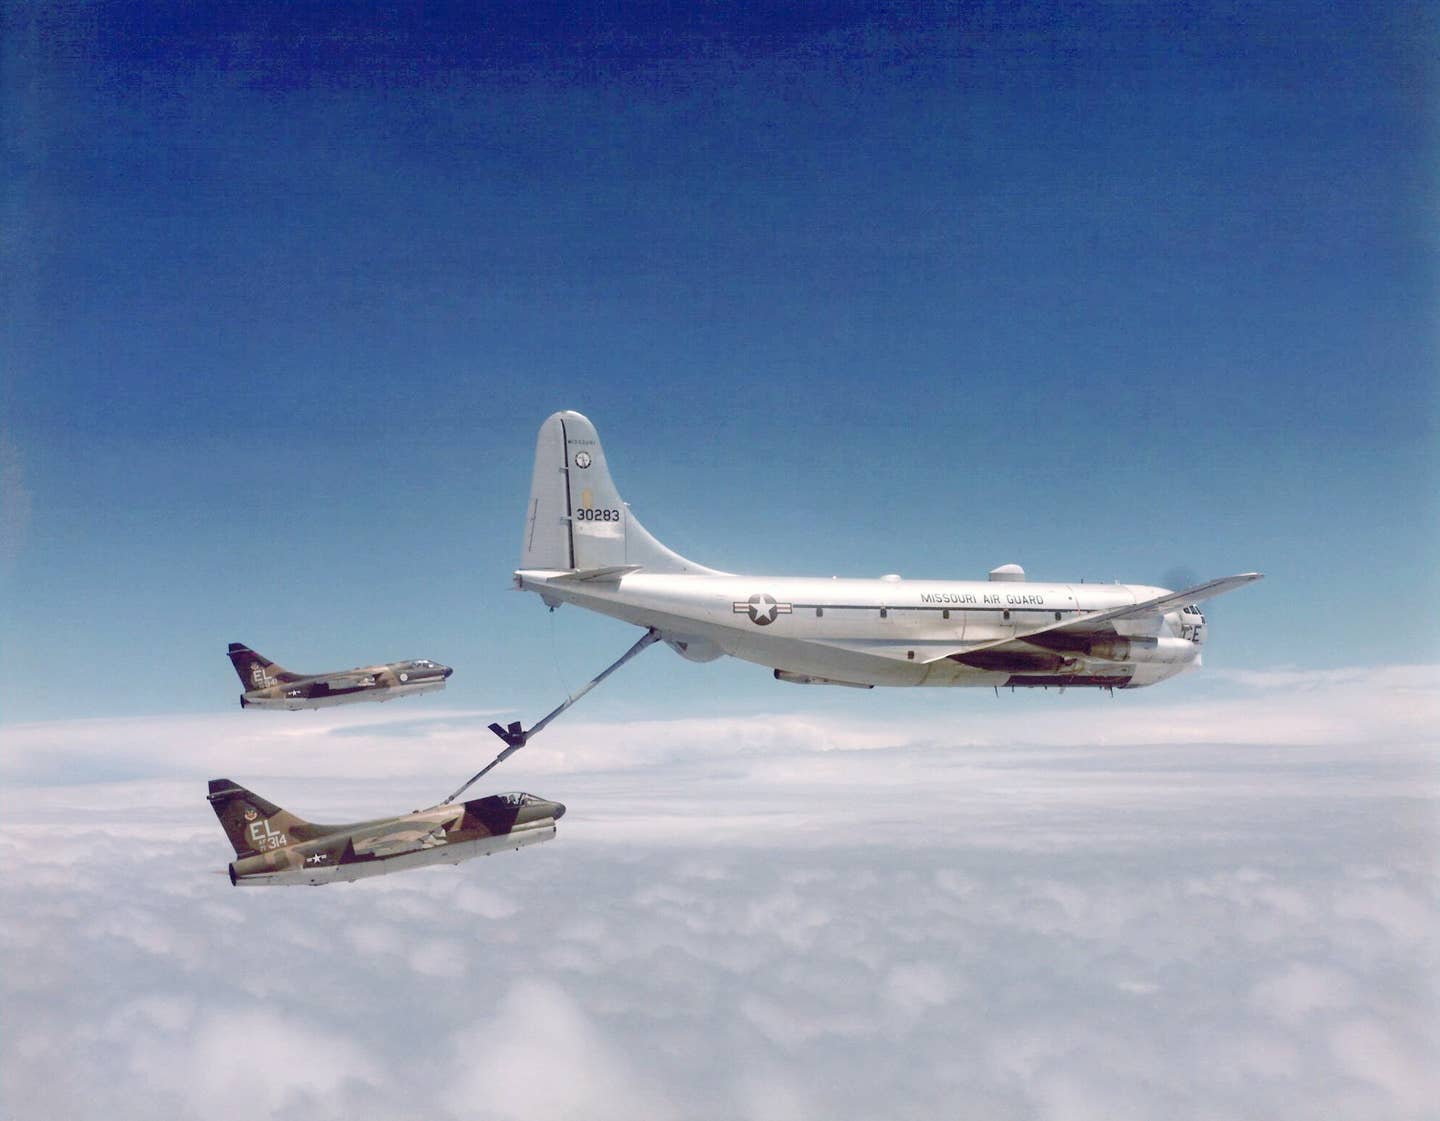 The KC-97 Stratofreighter was really an aerial refueling tanker, as seen in action with these A-7 Corsairs. (USAF)